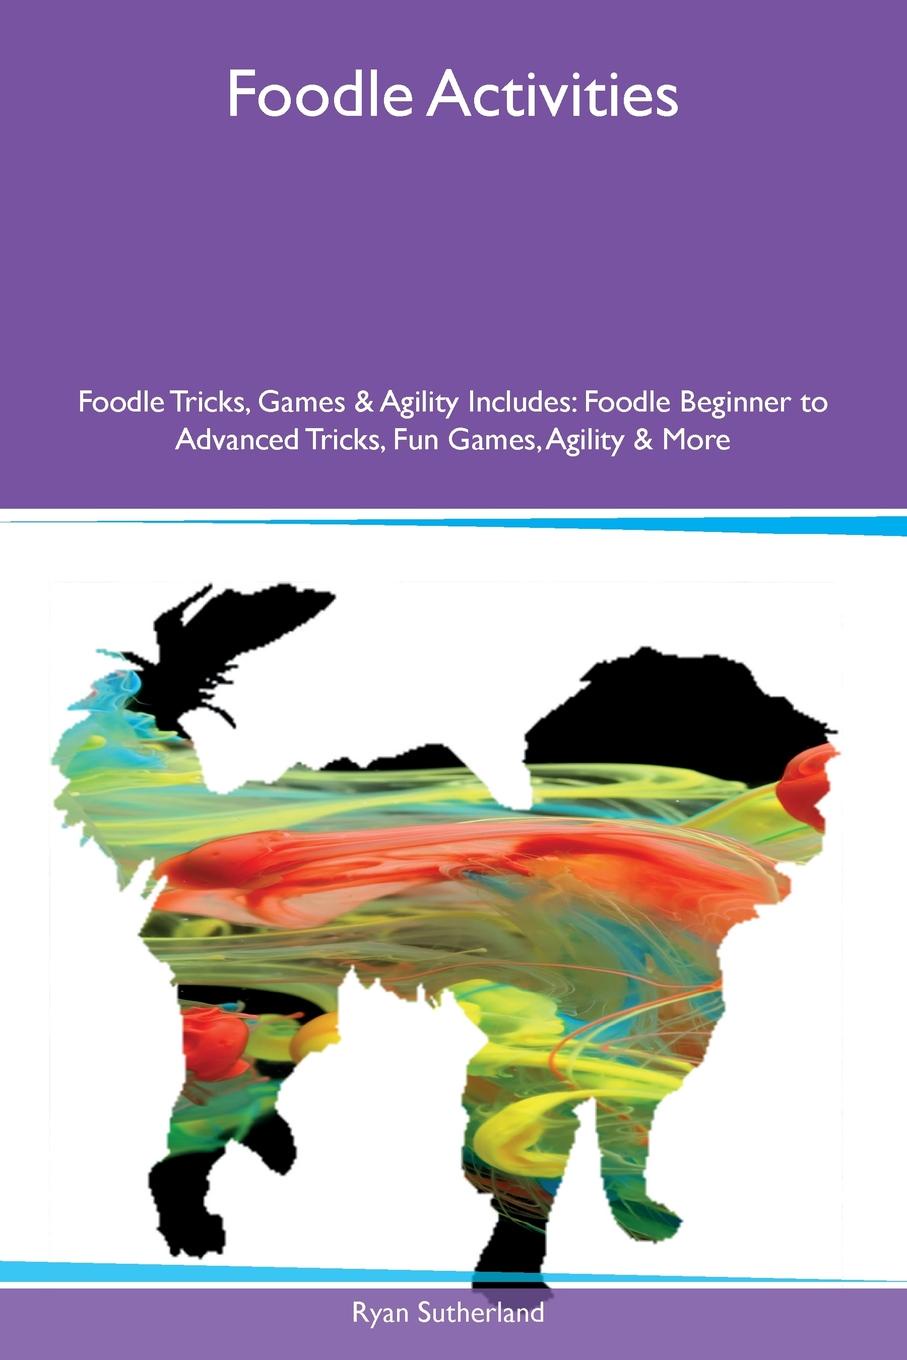 Foodle Activities Foodle Tricks, Games & Agility Includes. Foodle Beginner to Advanced Tricks, Fun Games, Agility & More